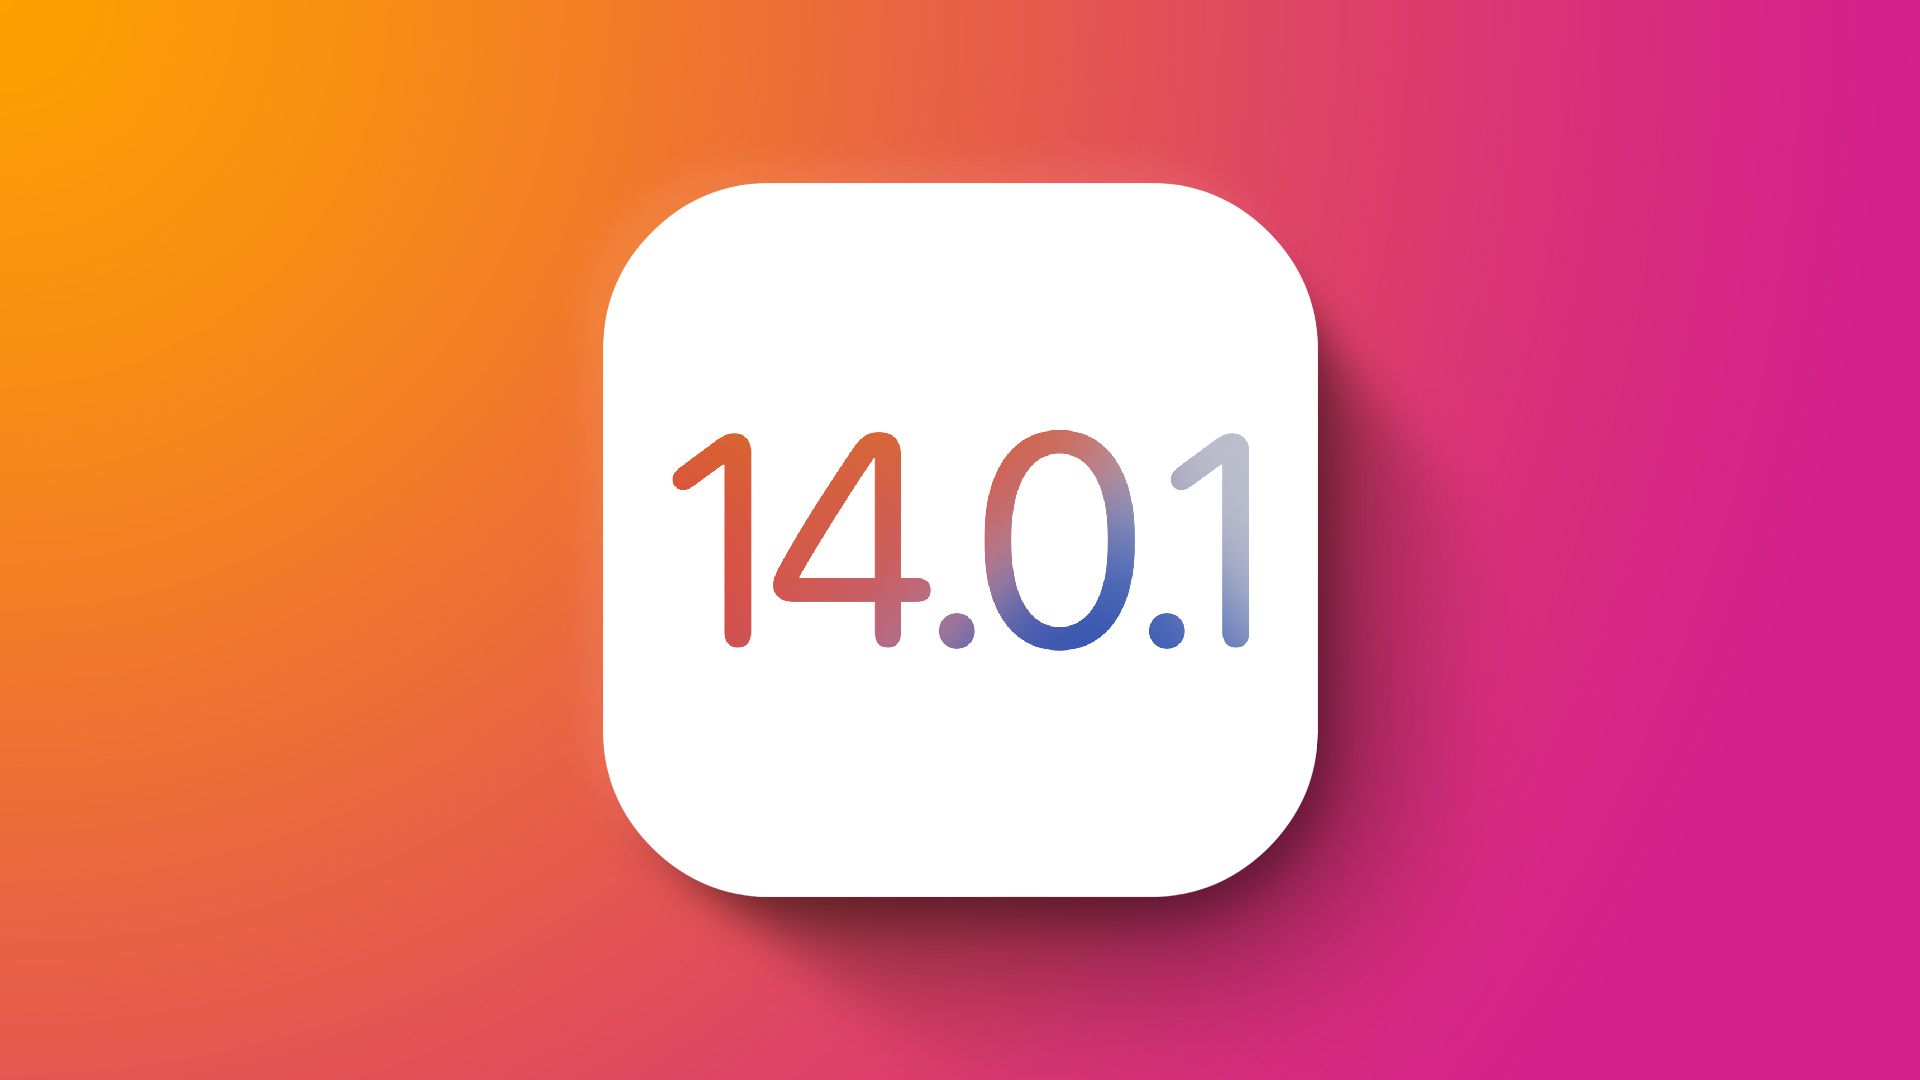 Apple Releases Ios 14 0 1 With Fix For Bug That Resets Default Apps After Rebooting Macrumors